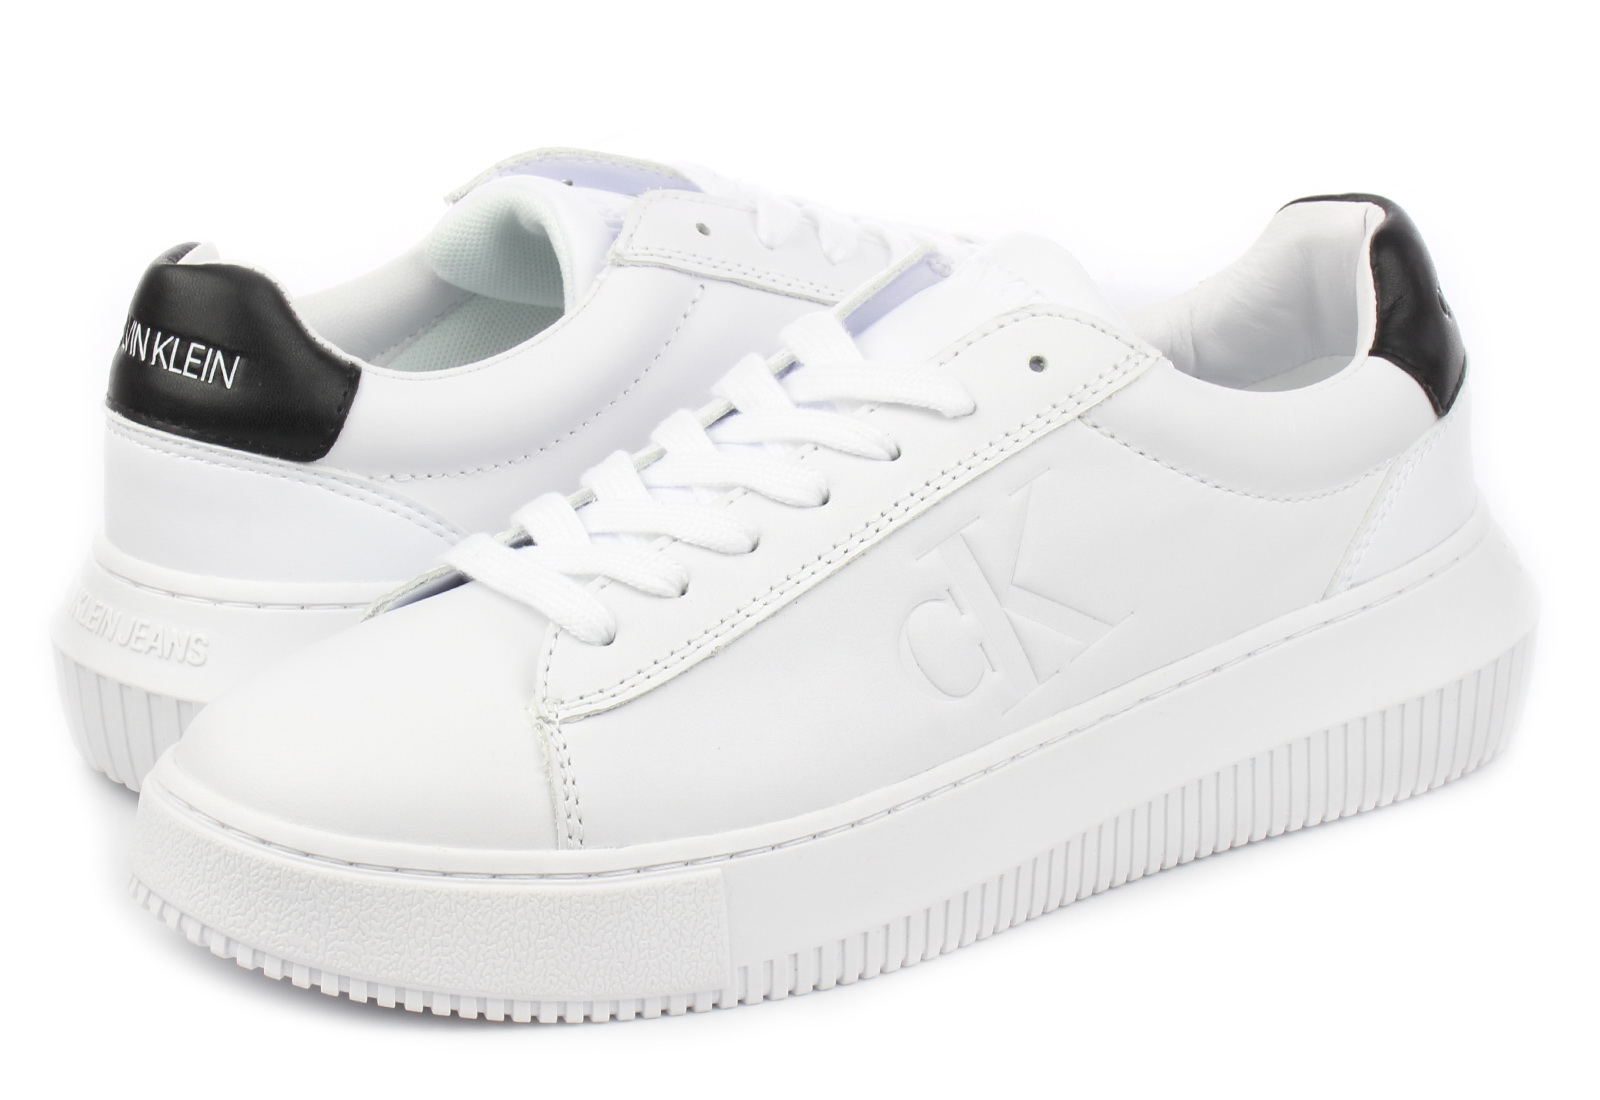 Calvin Klein Trainers - Sephire - YW00066-YAF - Online shop for sneakers,  shoes and boots